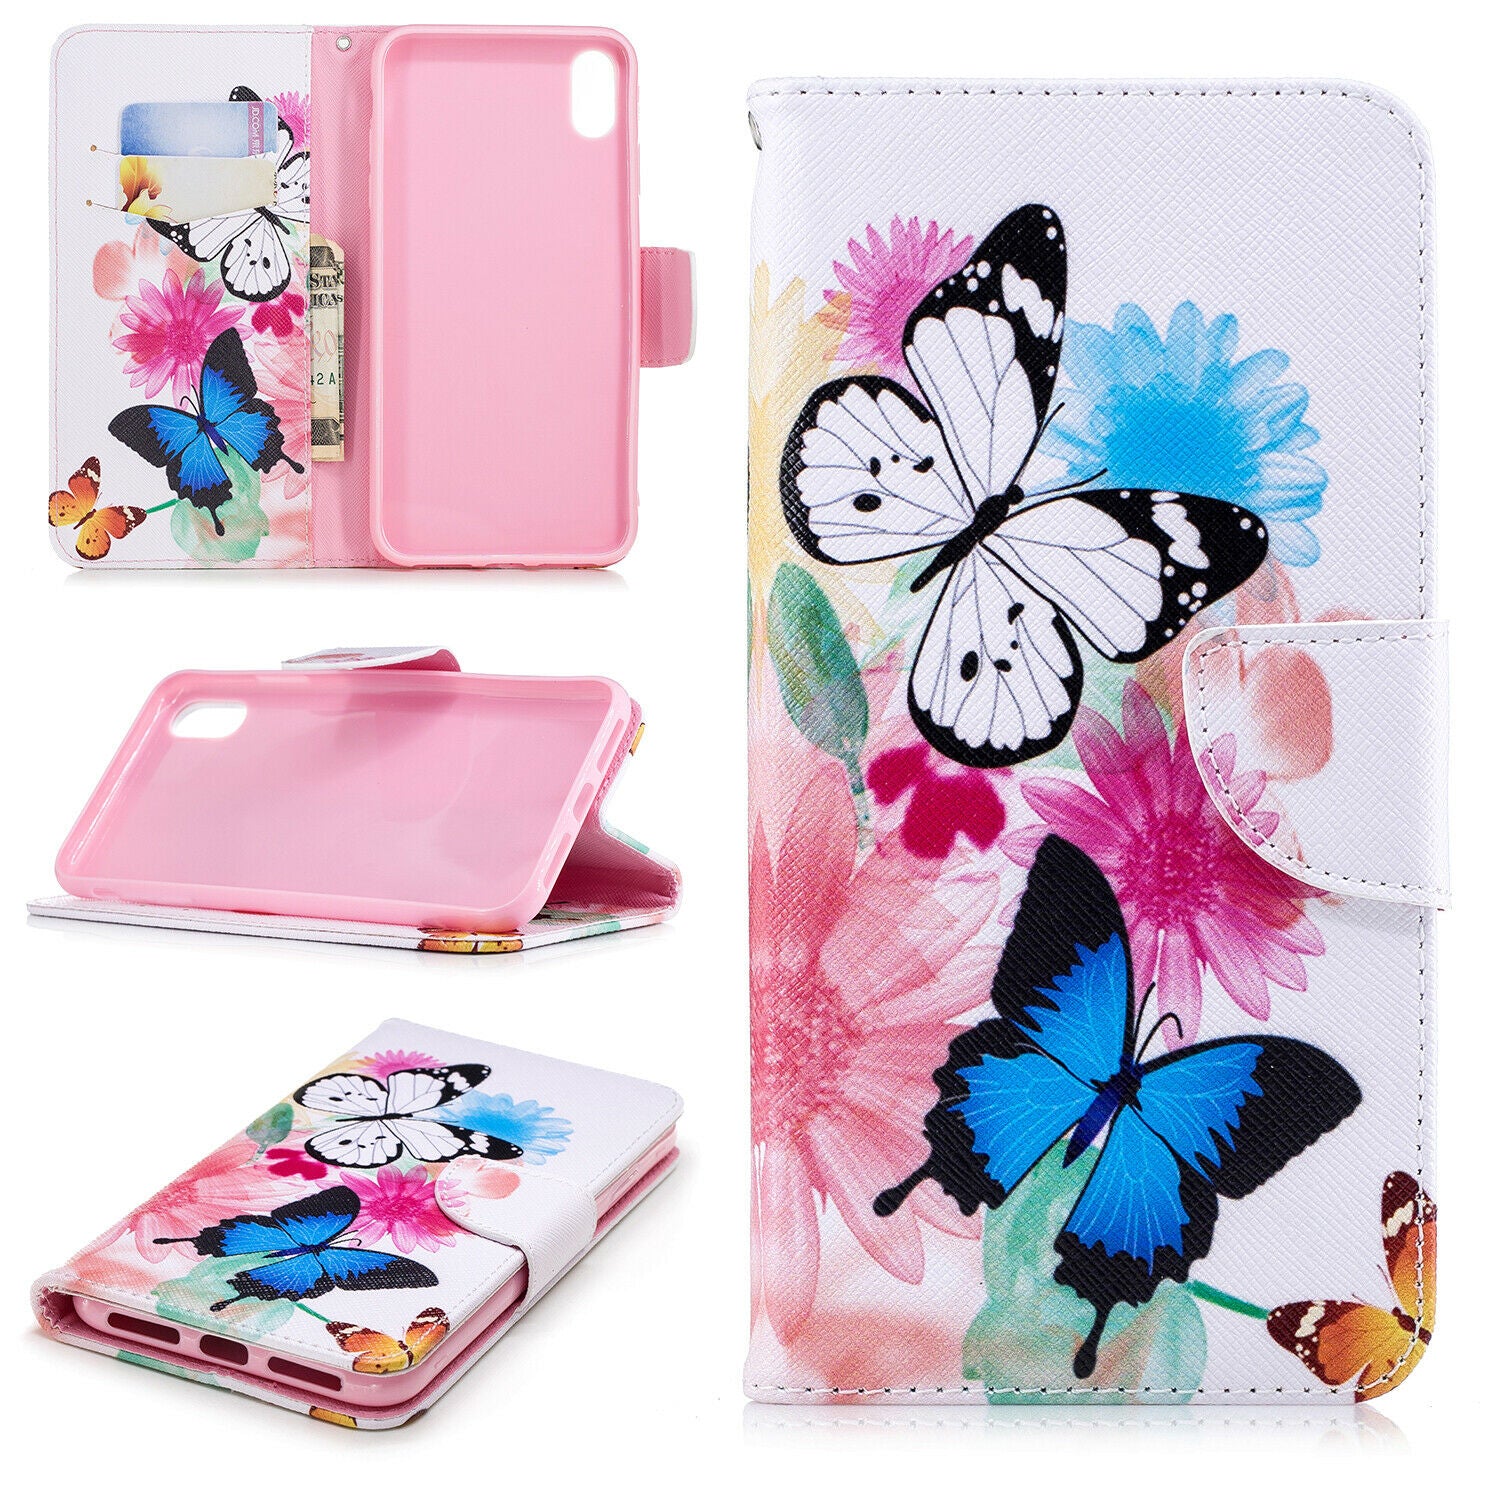 Samsung Galaxy A30 Wallet Leather Case Flip Magnetic Card Slot Cover-Beautiful Butterfly